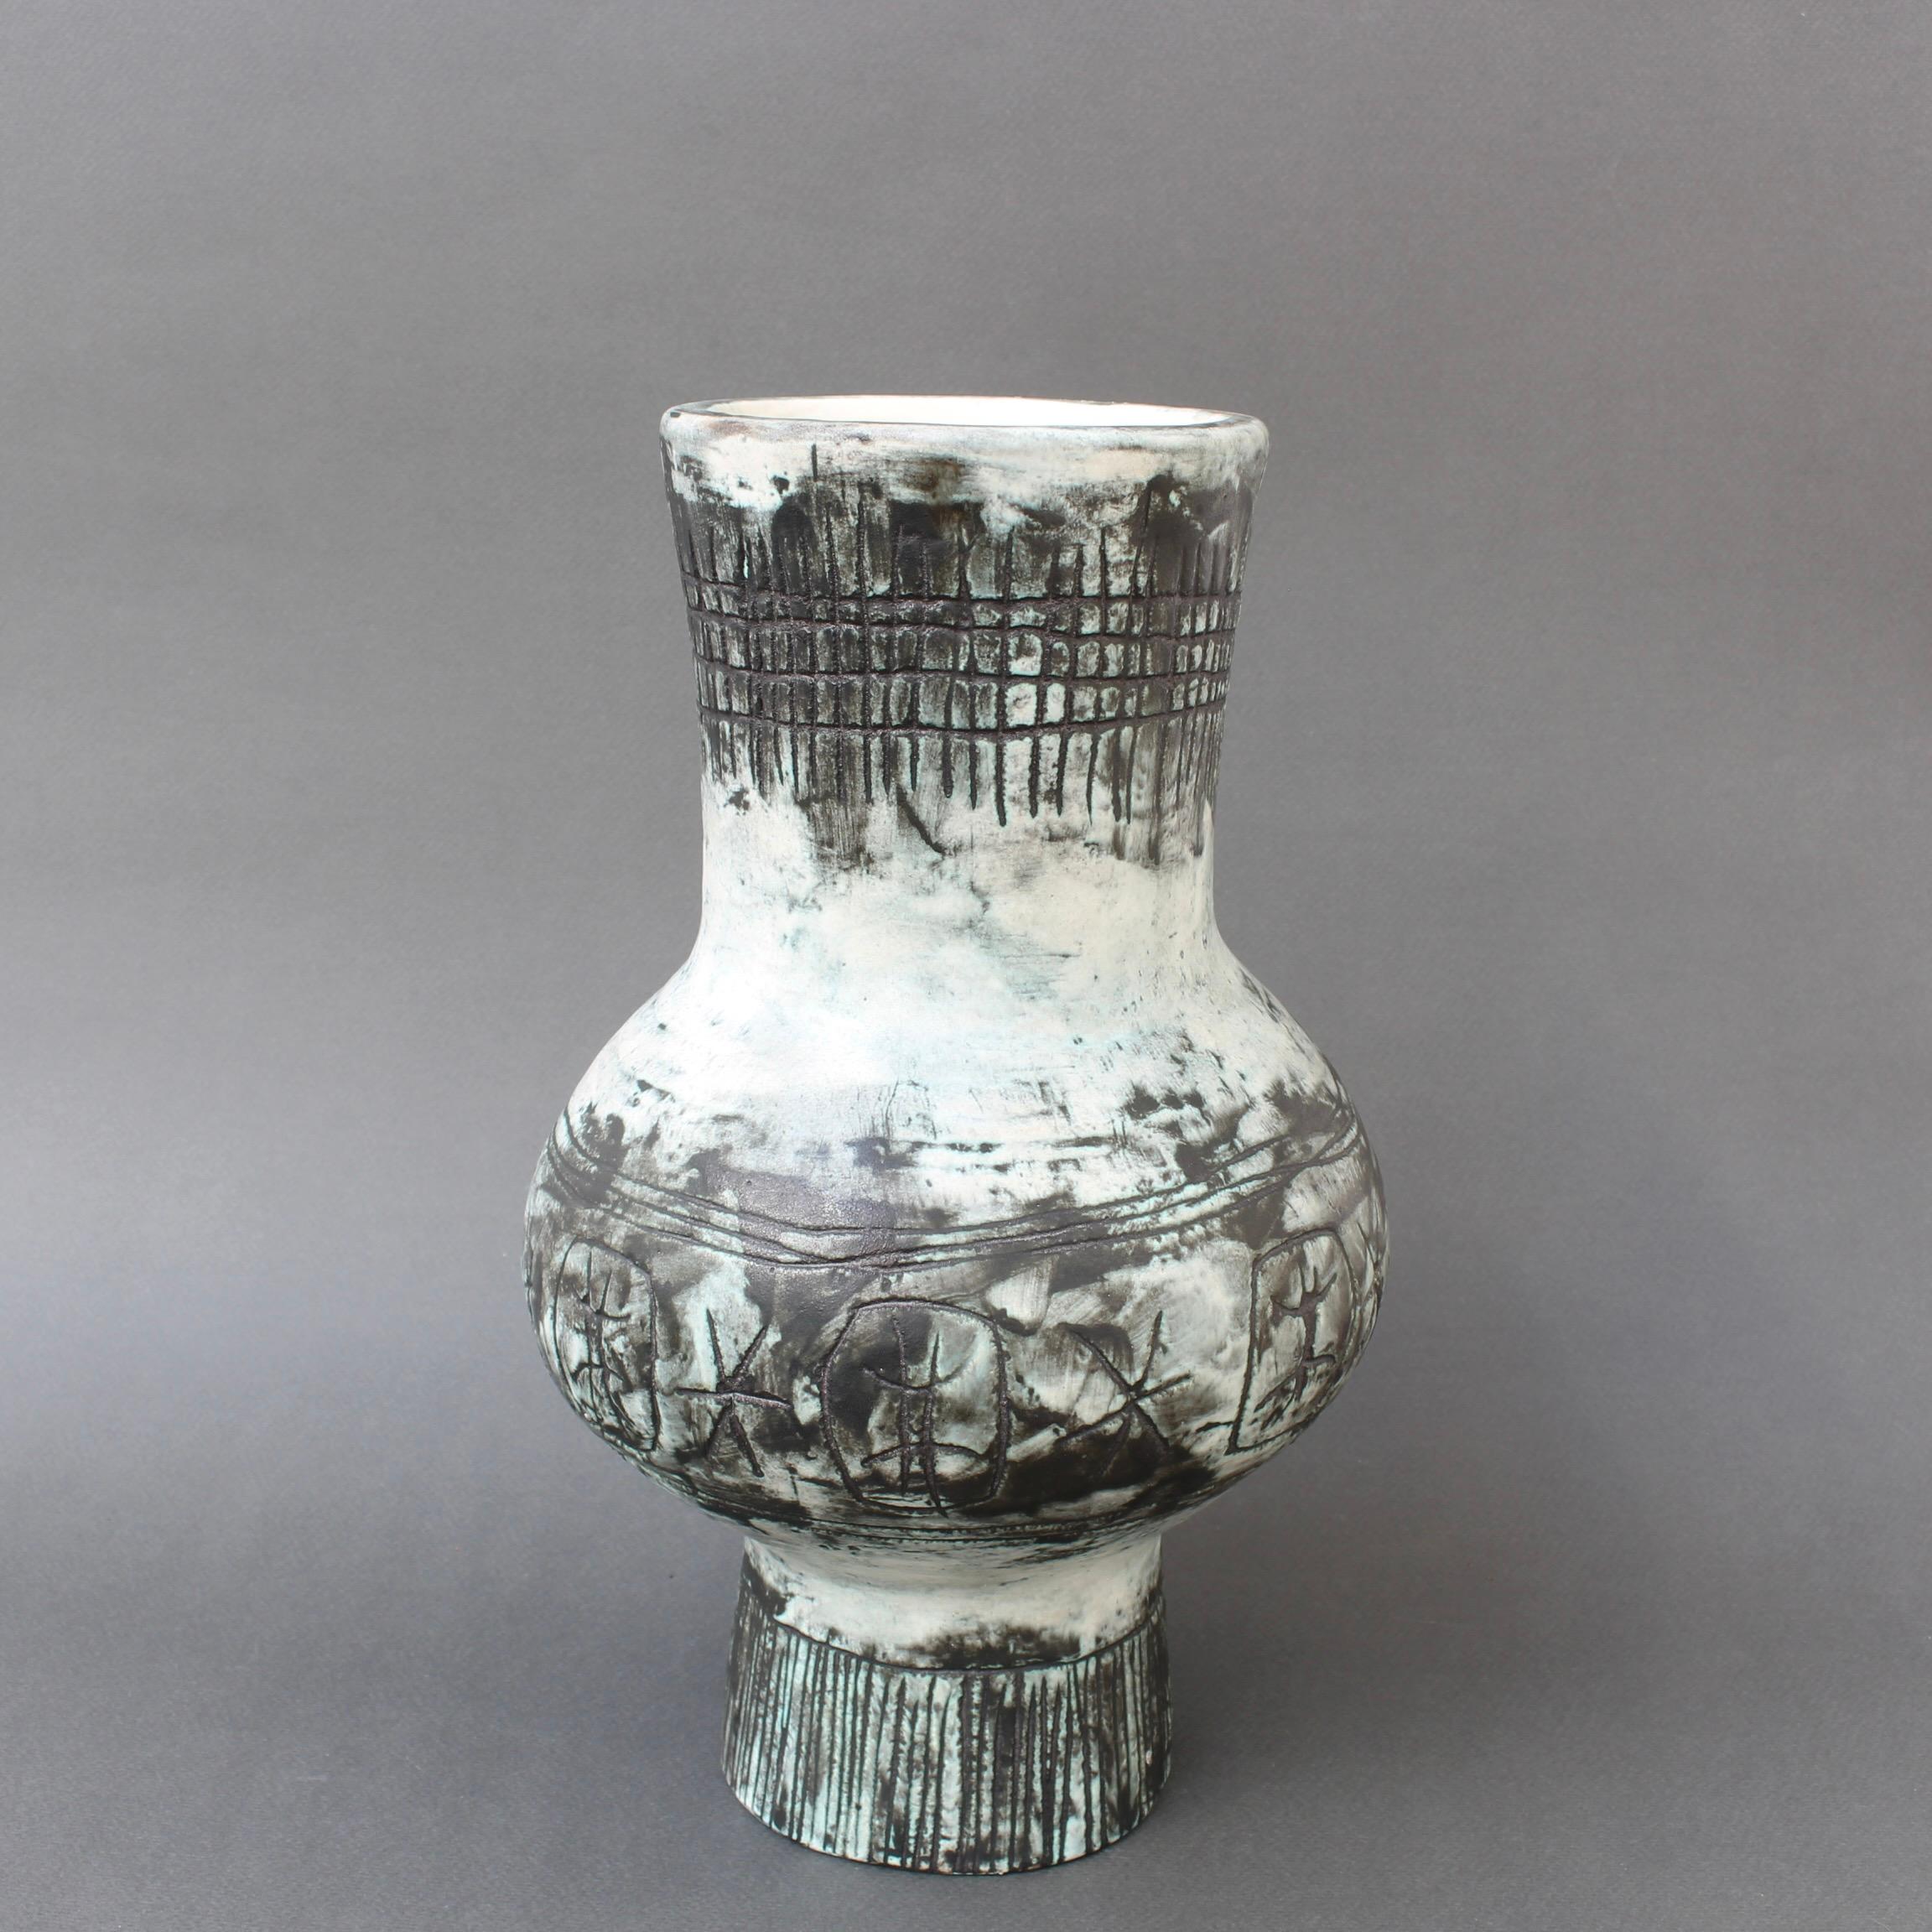 Vintage French ceramic vase by Jacques Blin with Jean Rustin (circa 1960s). This elegant piece has Blin's trademark cloudy glaze but with decoration by French artist, Jean Rustin (1928-2013). It takes the form of whimsical doodling on the centre